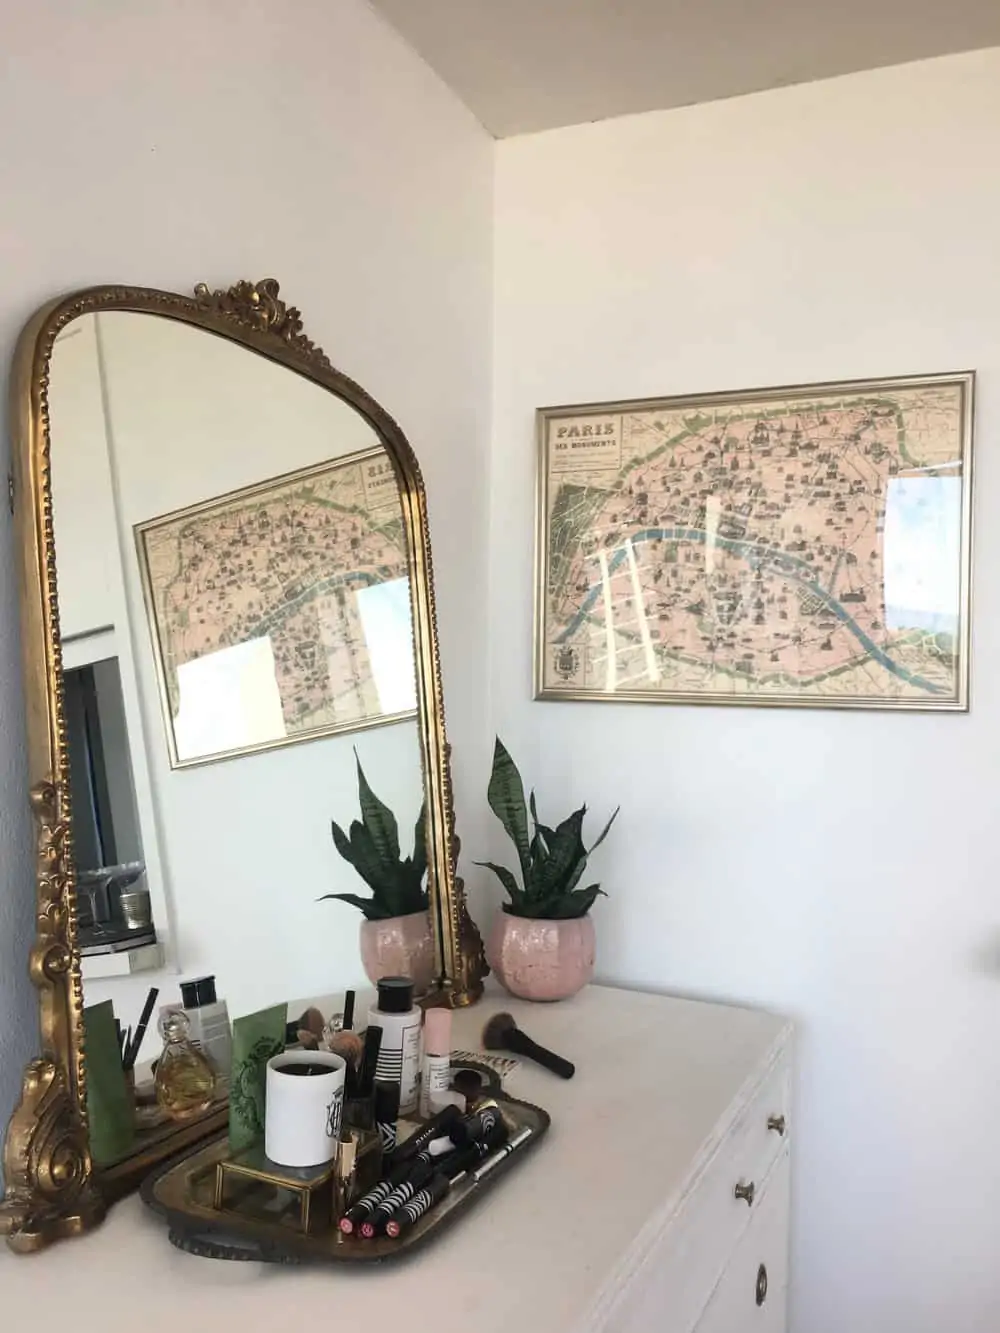 my favorite corner in my apartment thanks to this Parisian inspired mirror and map